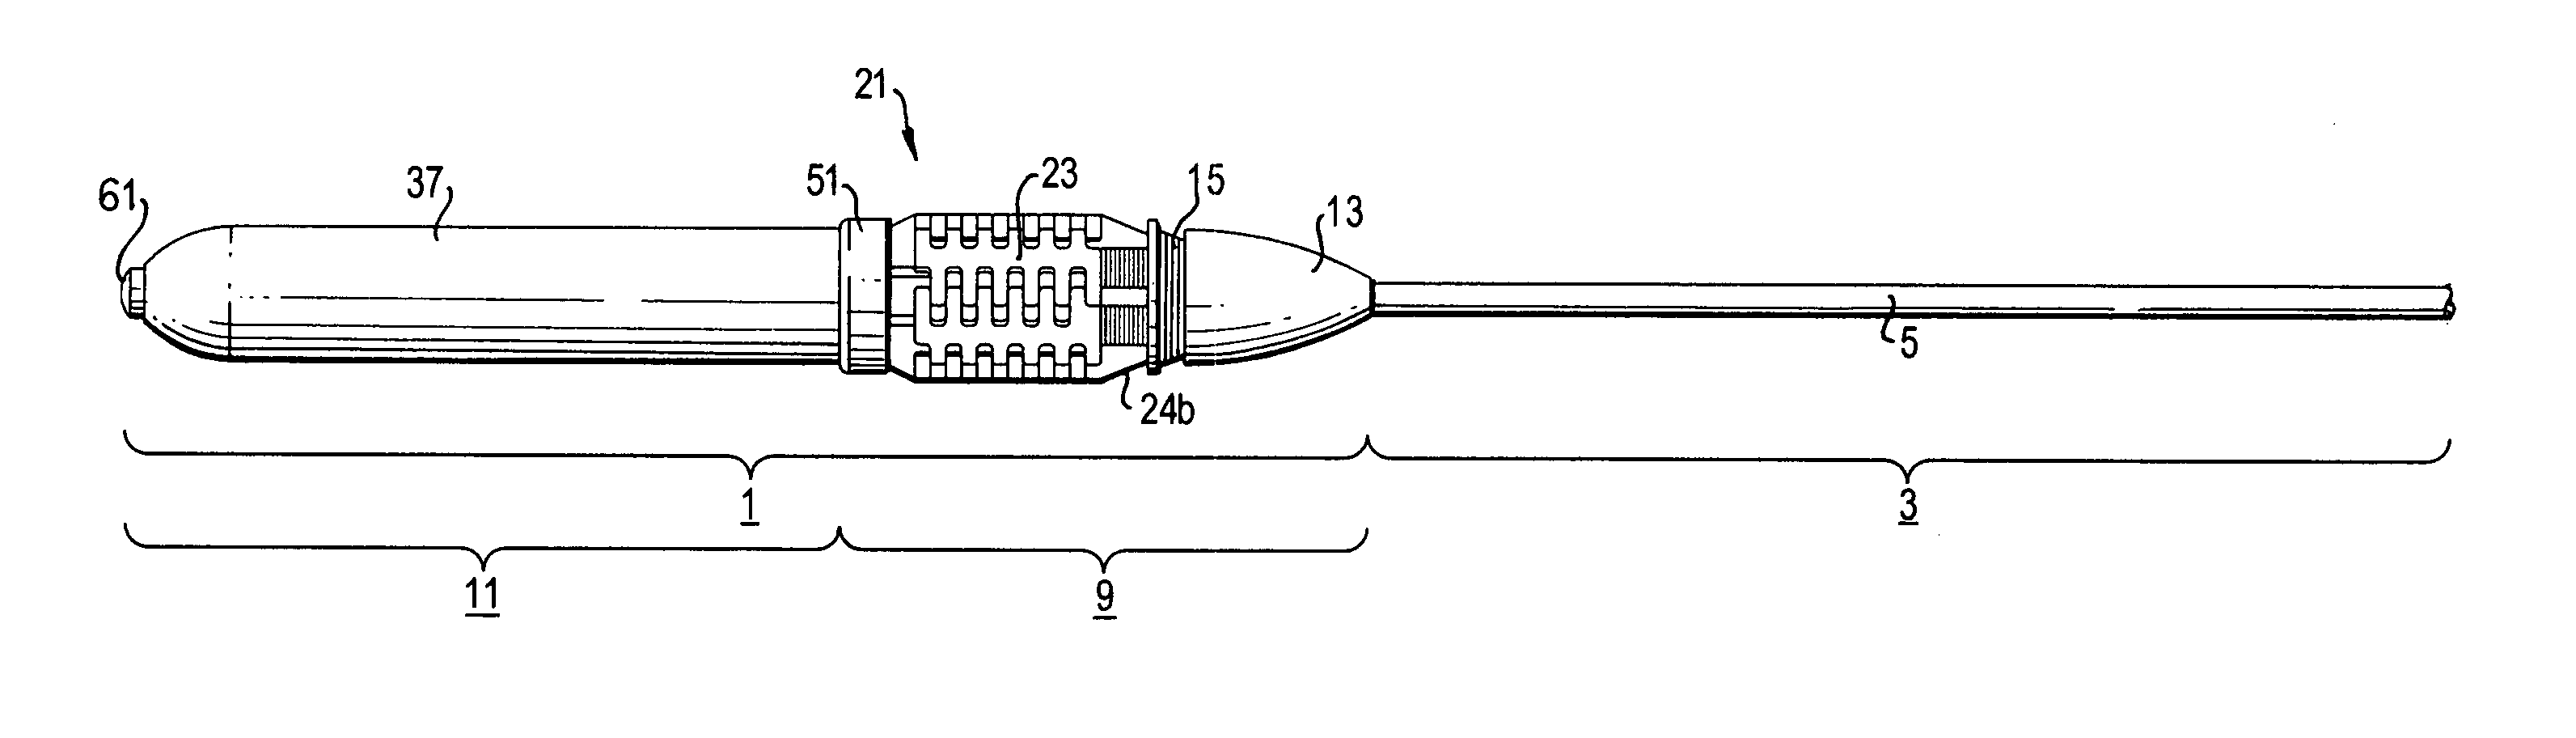 Actuating and locking mechanism for a surgical tool